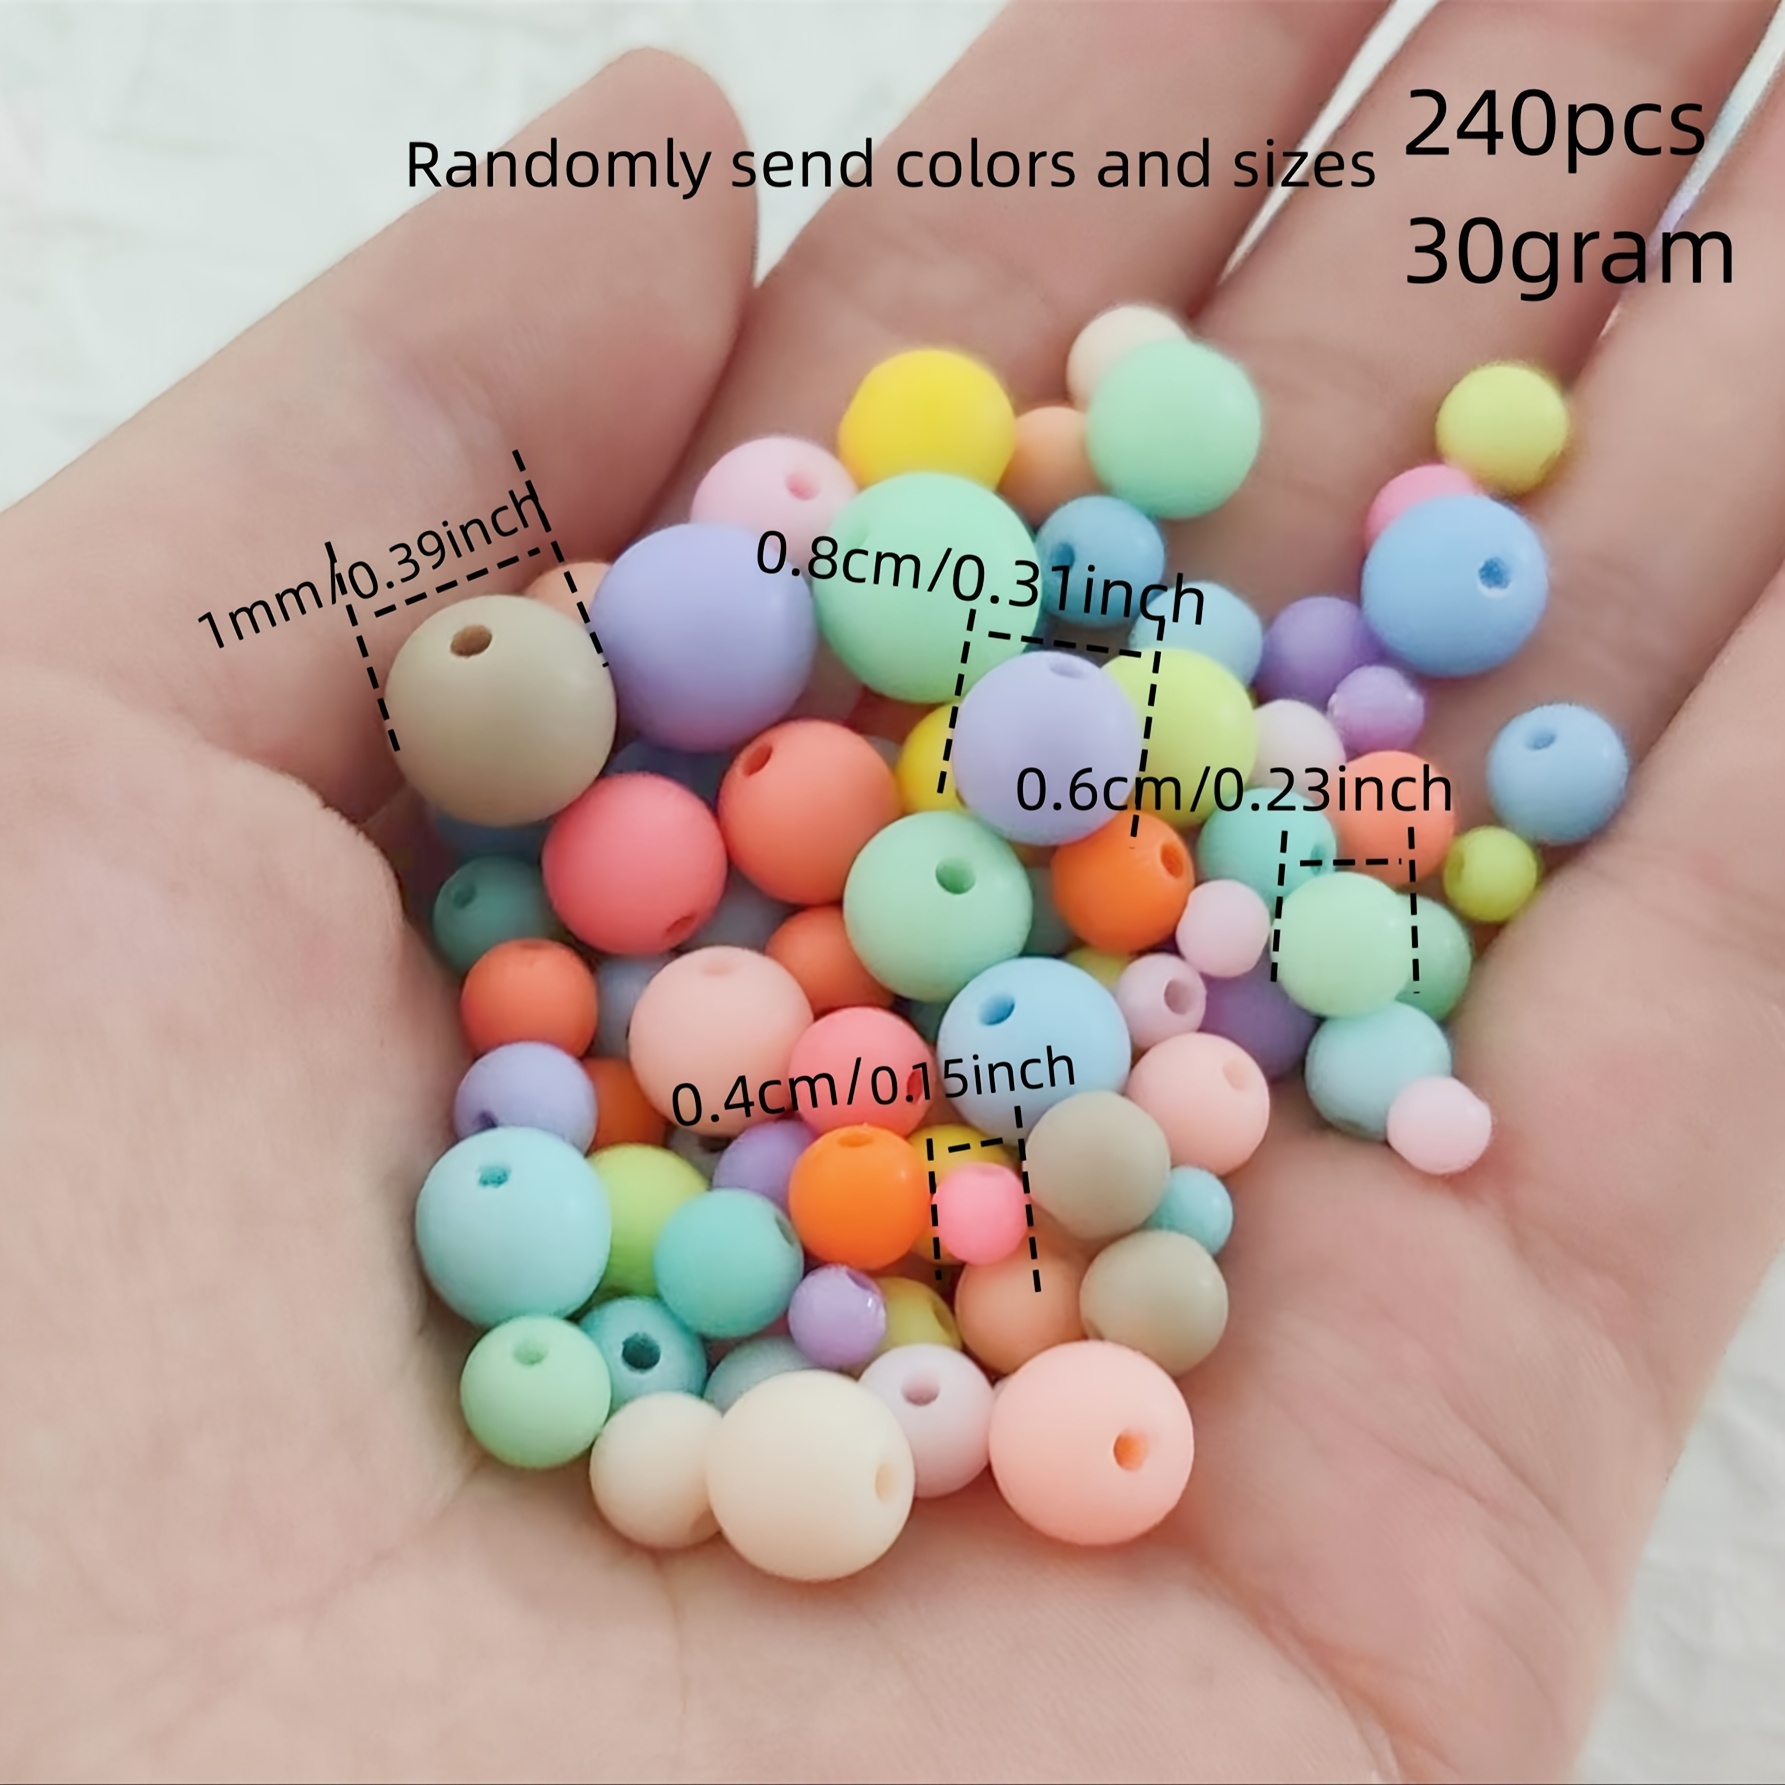 

240pcs Assorted Size And Colors, Acrylic Frosted Round Beads, For Necklace And Bracelet Making, Crafting Supplies